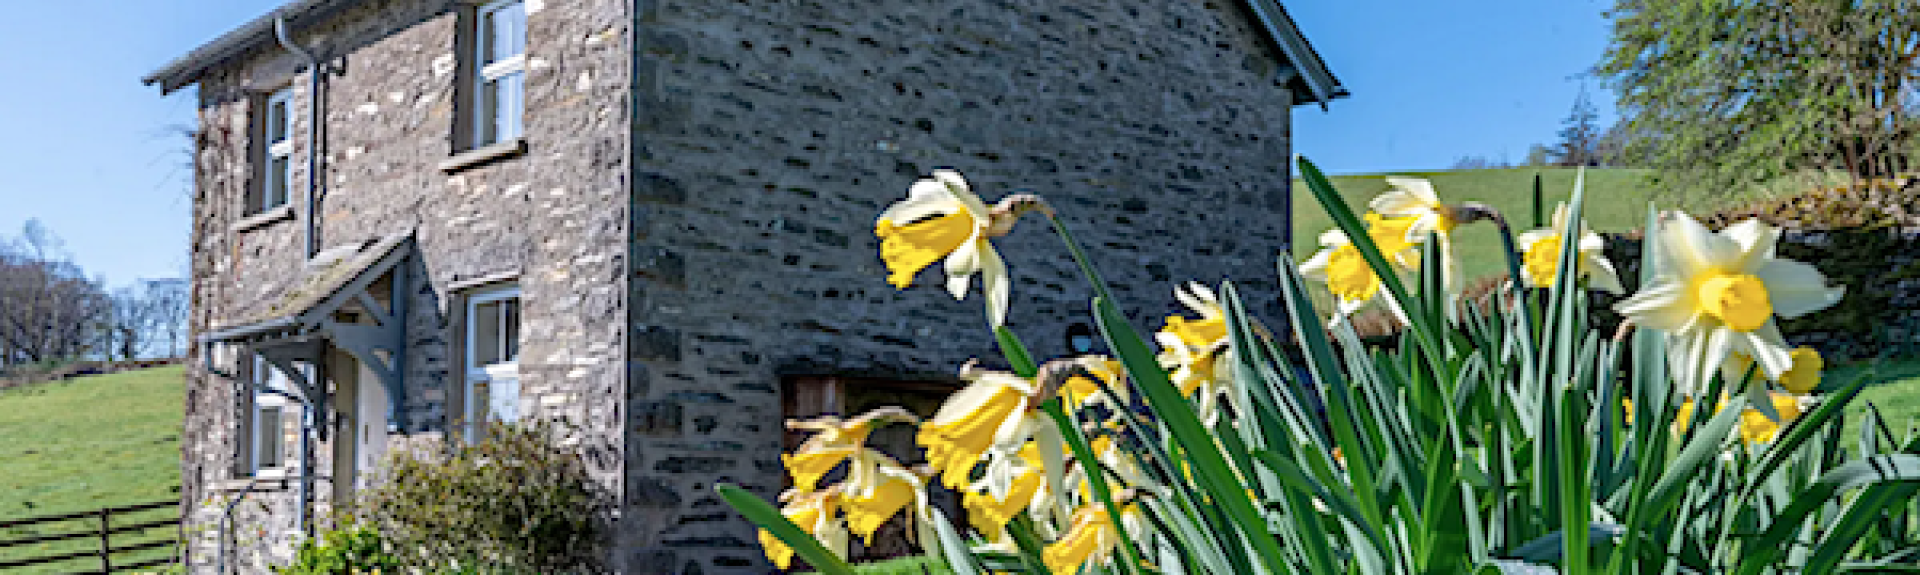 Daffodils grow in front of a stone-built barn conversion in the Cumbrian countryside